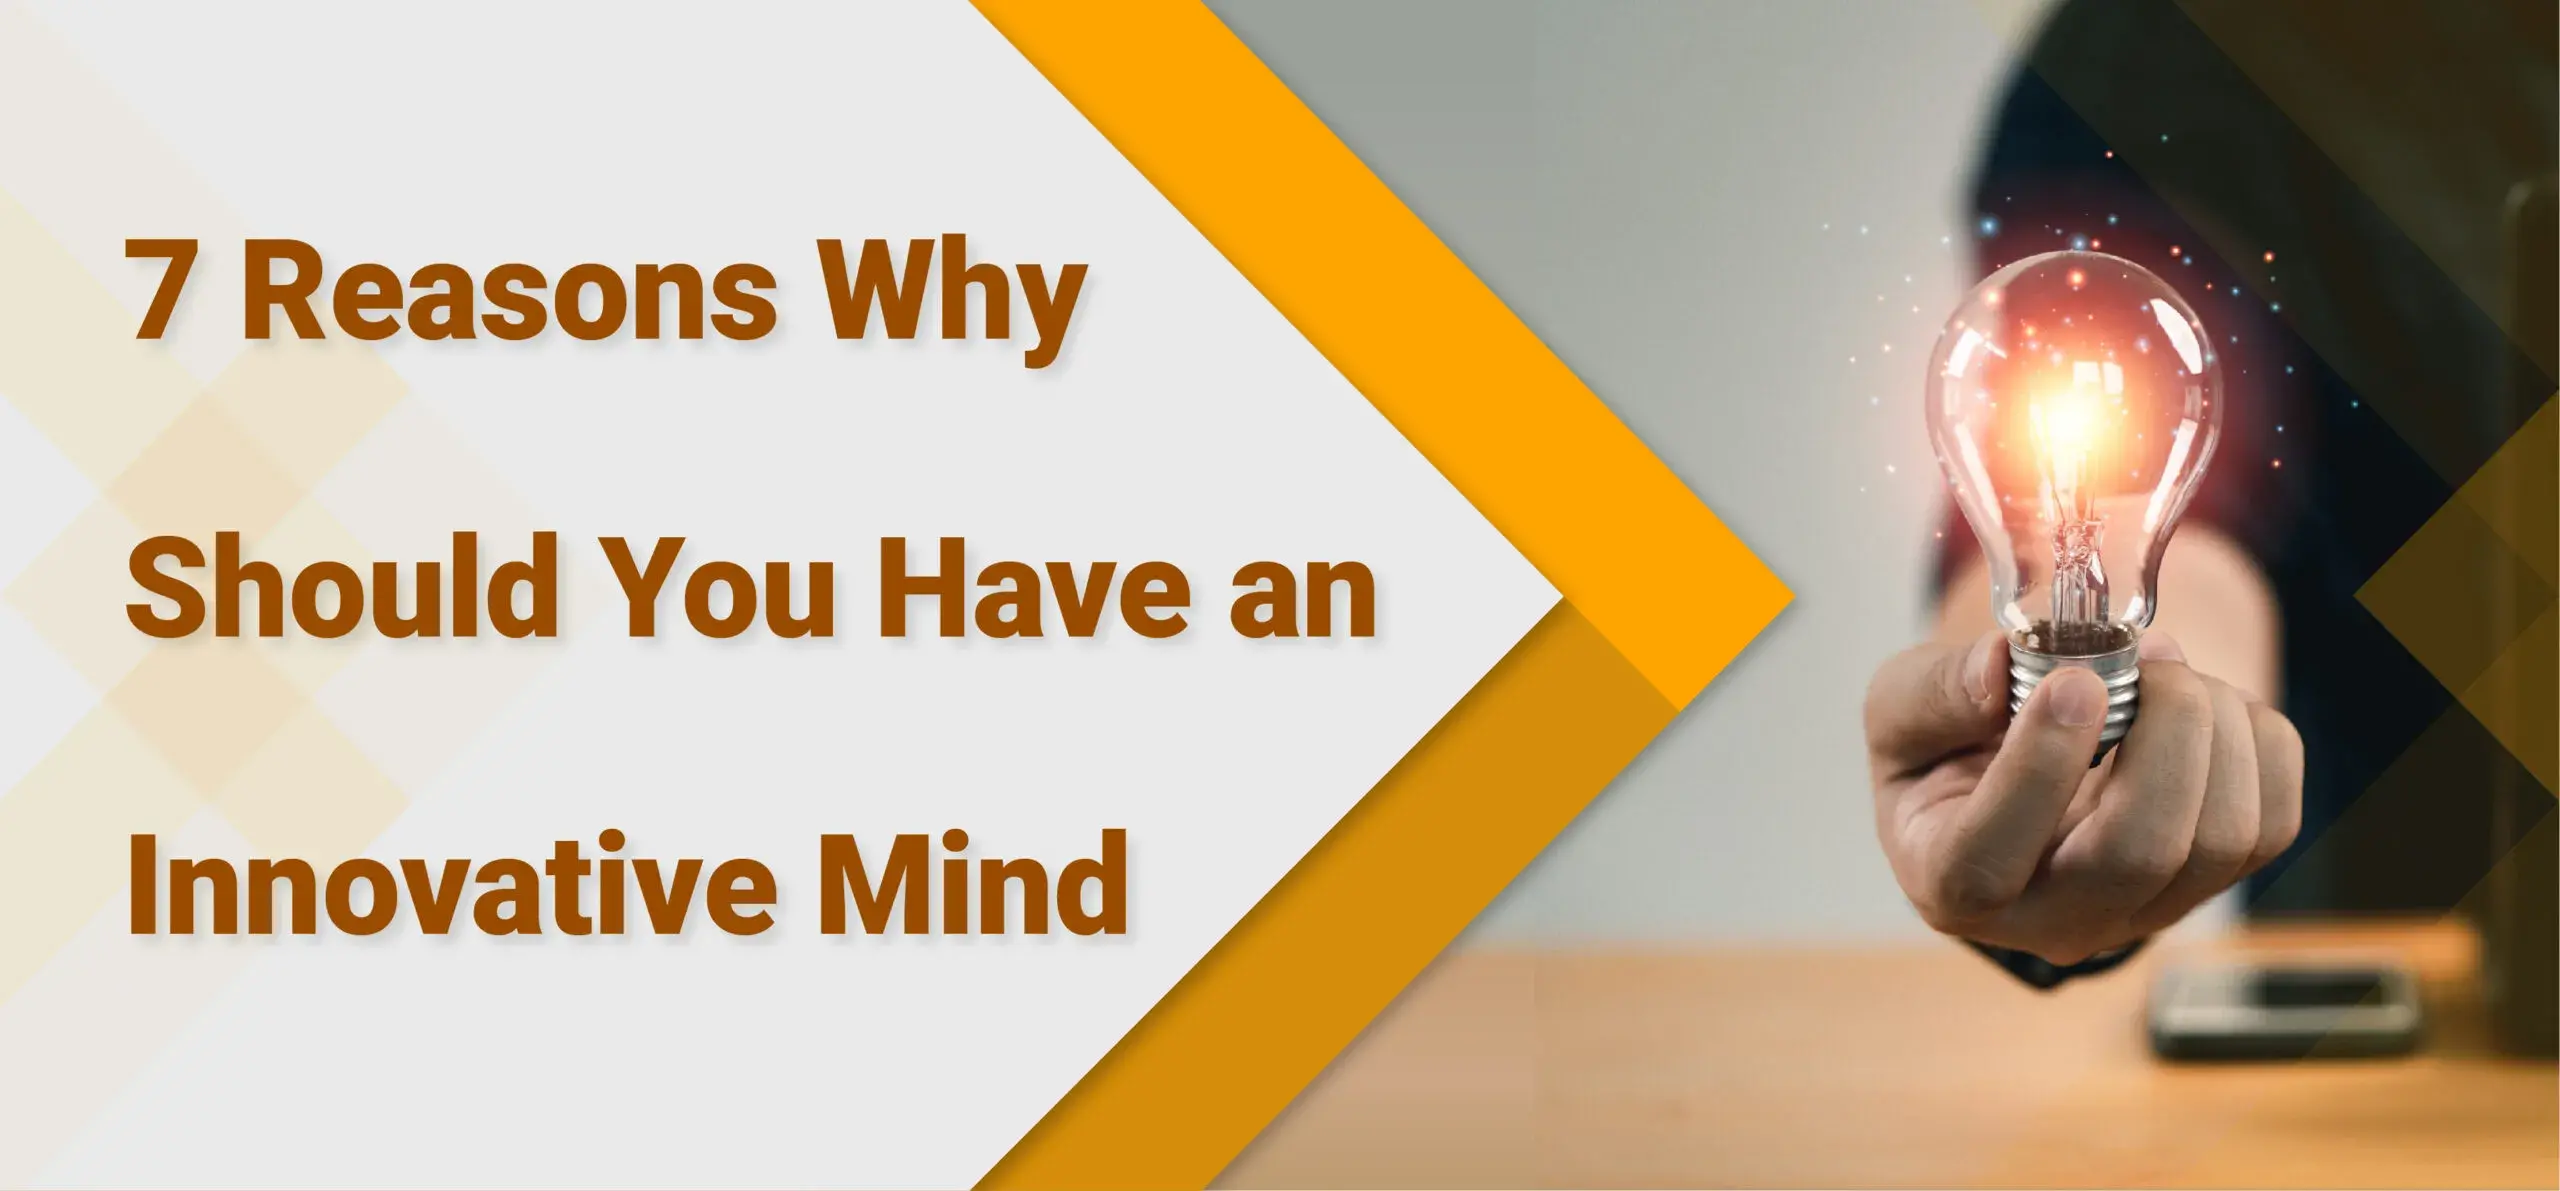 7 Reasons Why You Need an Innovative Mind for Business Success.